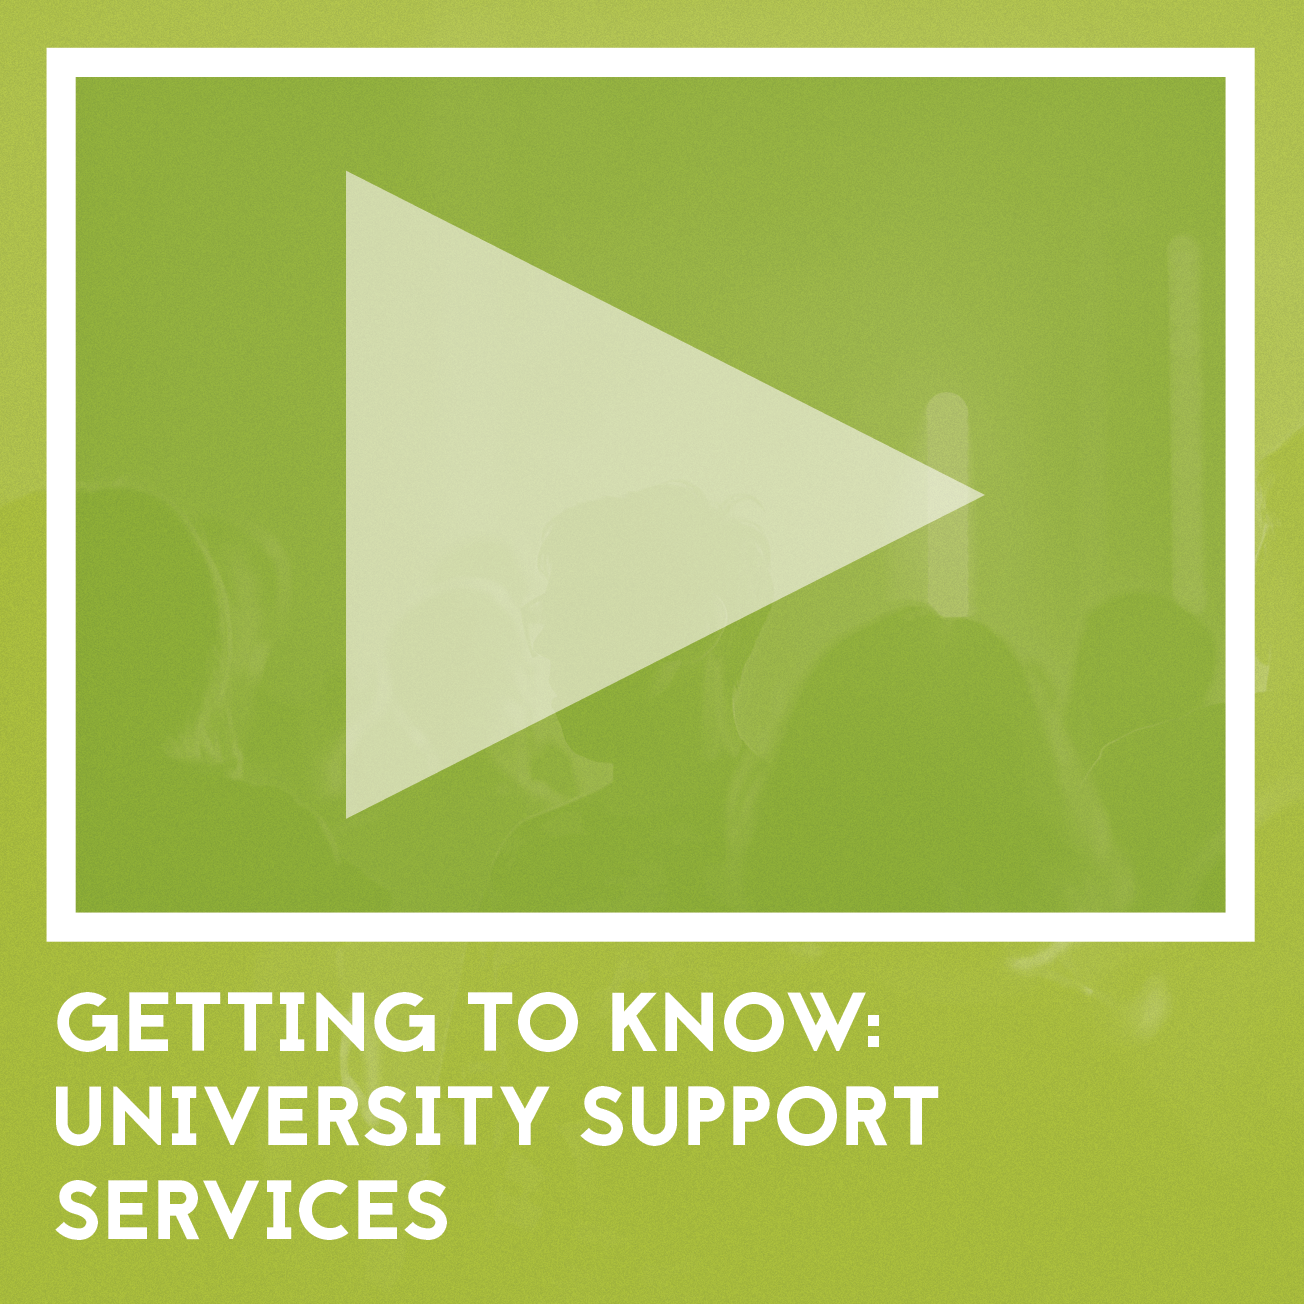 Video Available Soon: Getting to know, university support services